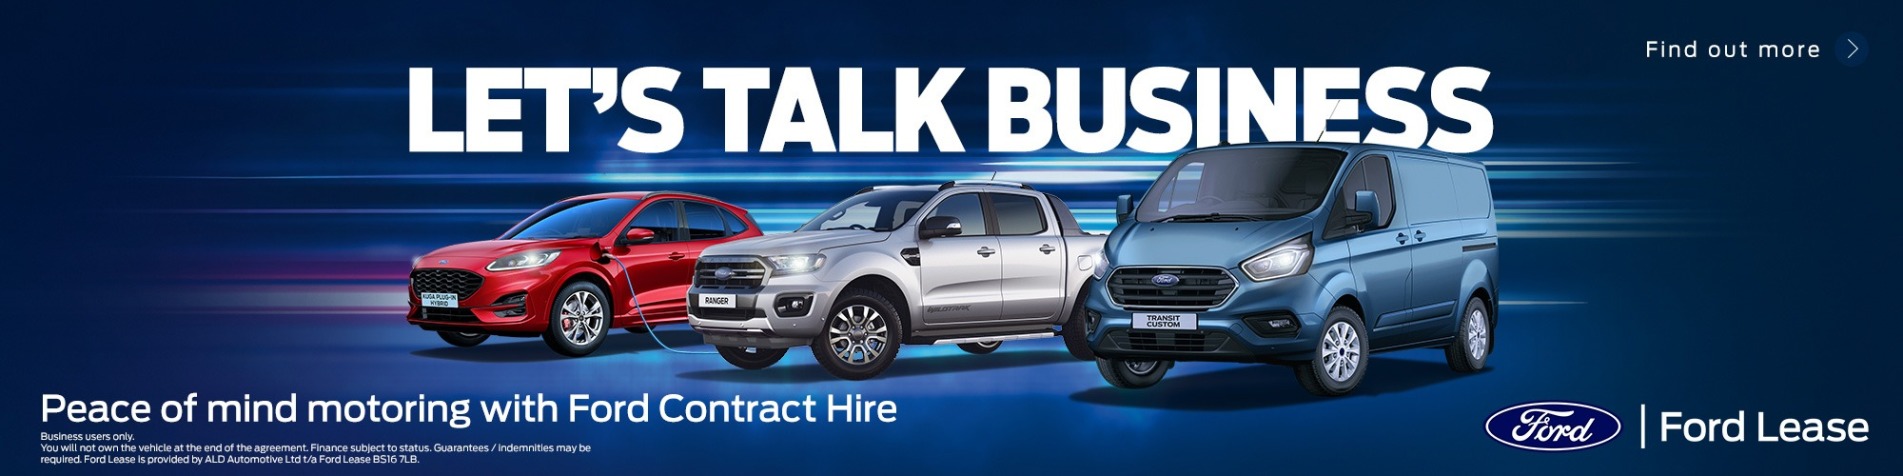 Ford Talk Business Banner